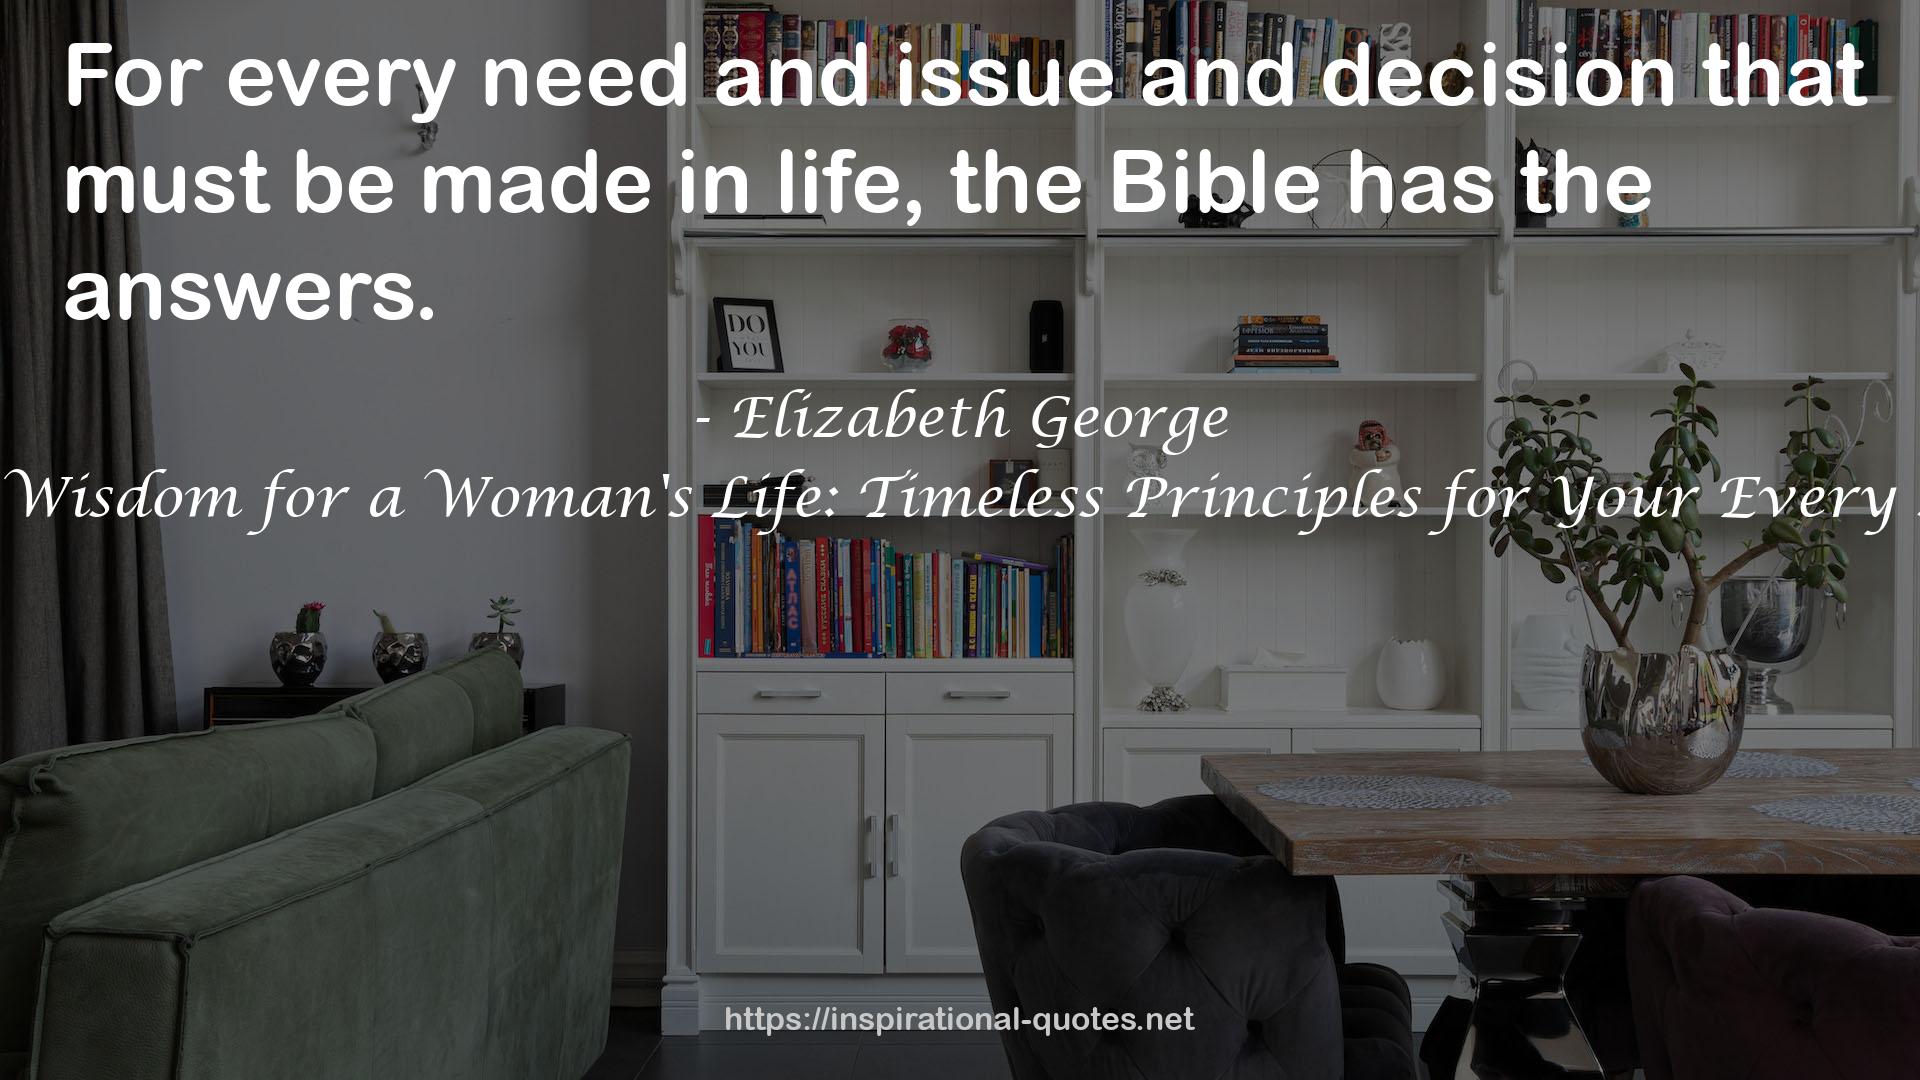 God's Wisdom for a Woman's Life: Timeless Principles for Your Every Need QUOTES